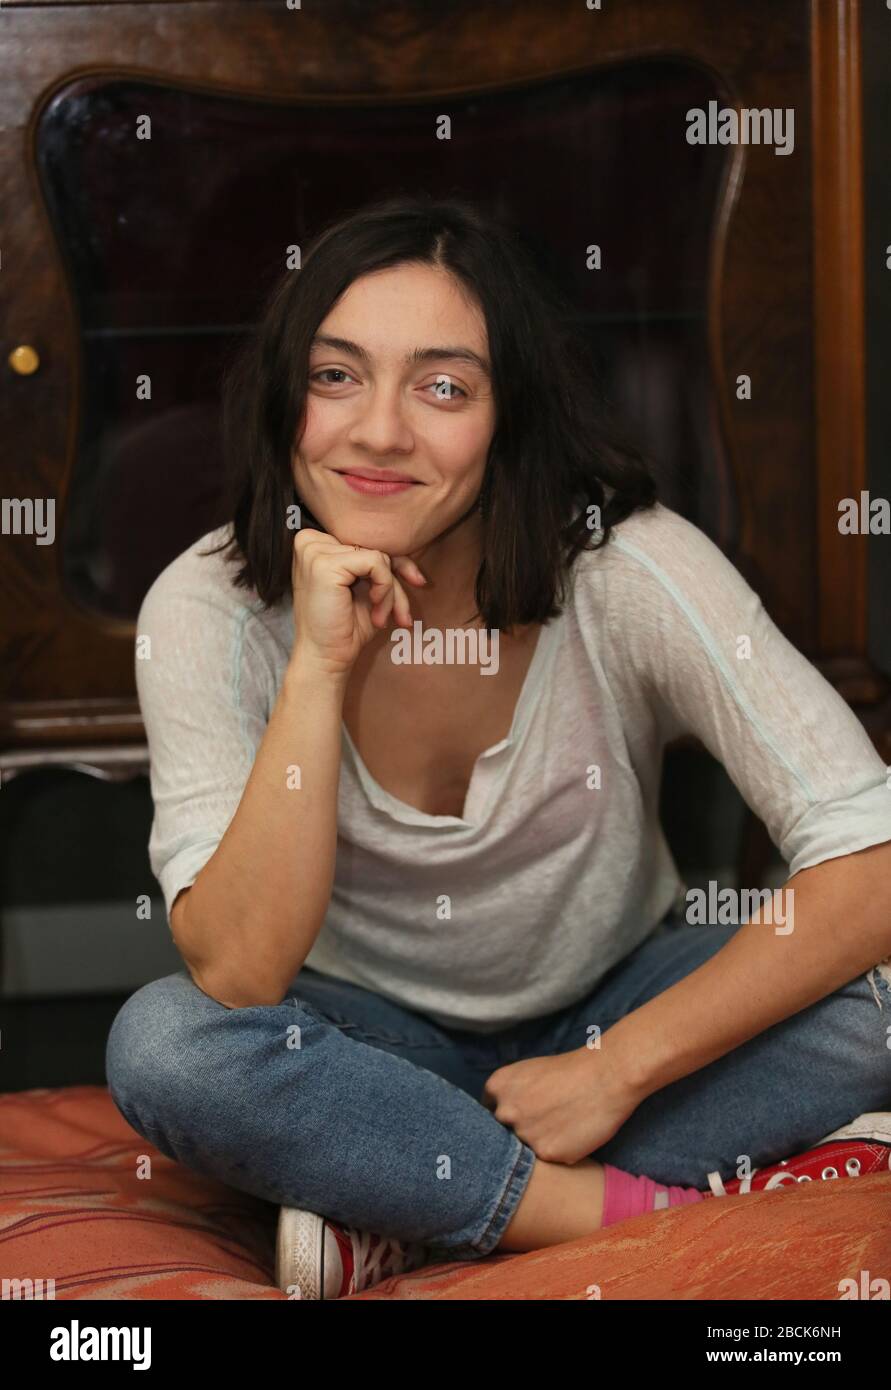 ISTANBUL, TURKEY - APRIL 21: Famous Turkish actress, television and movie star Merve Dizdar portrait on April 21, 2018 in Istanbul, Turkey. Stock Photo